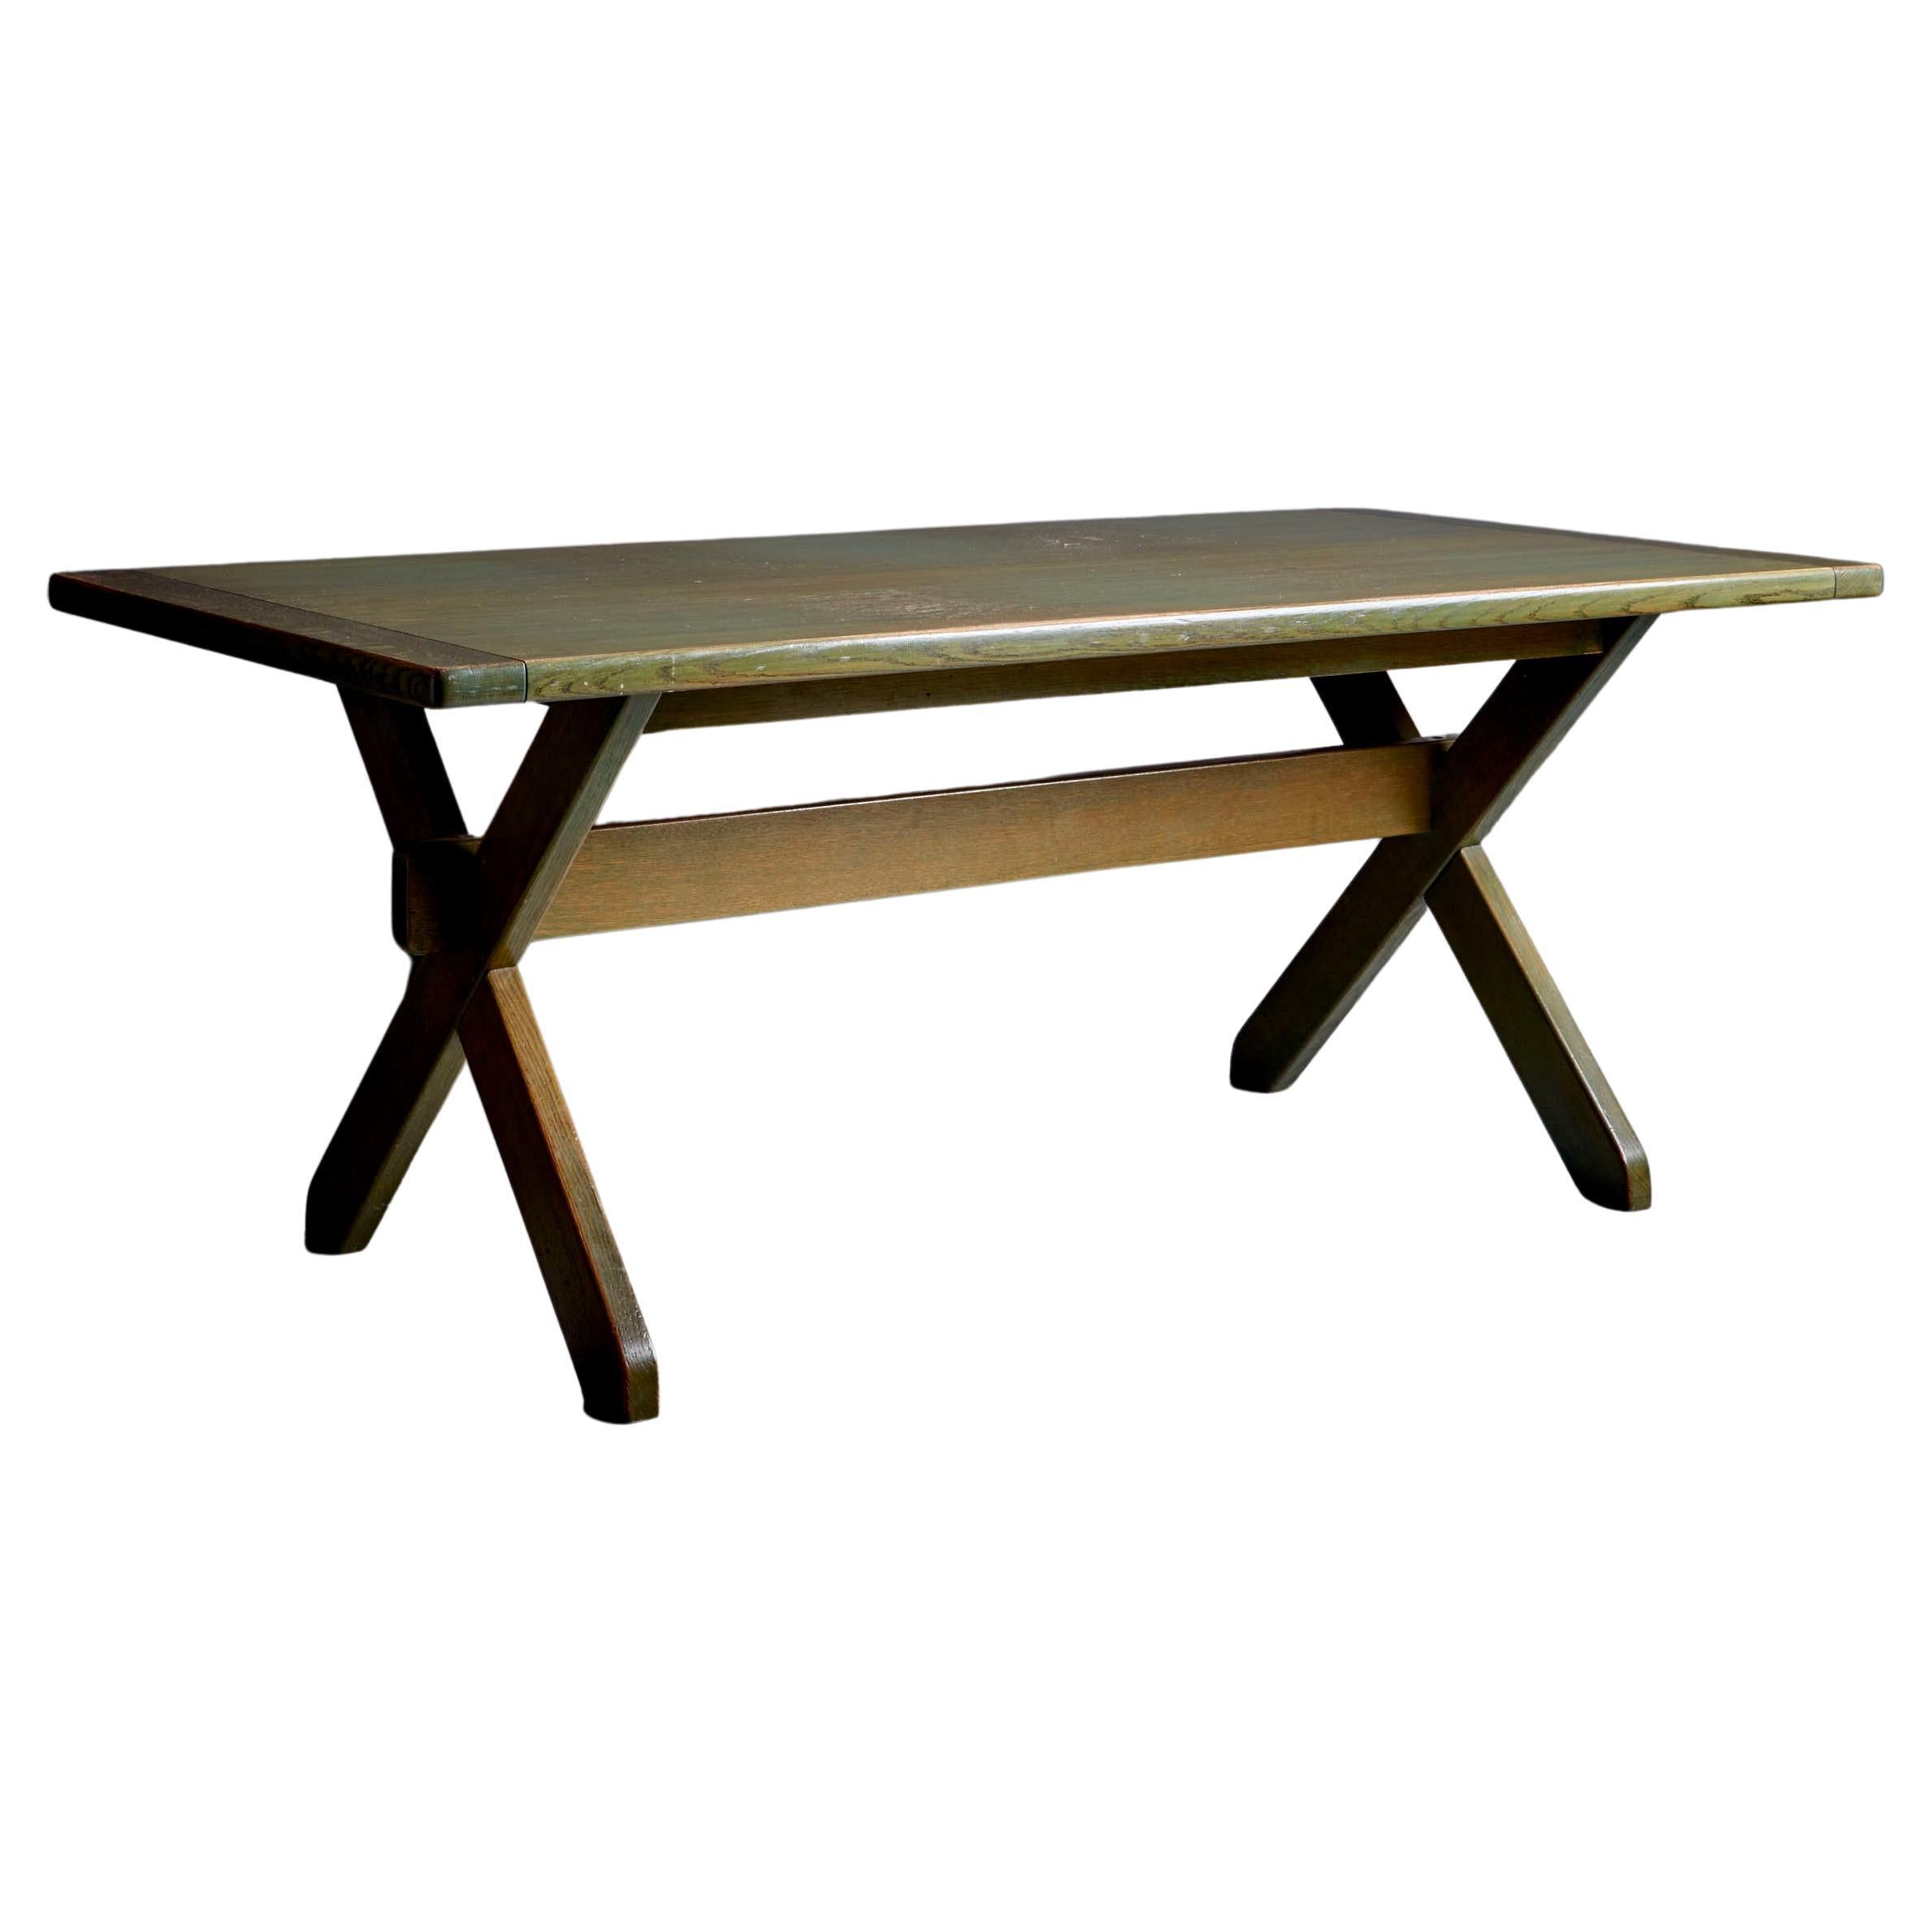 WK Möbel Dining Table in Green Pine Wood, Germany - 1960s For Sale